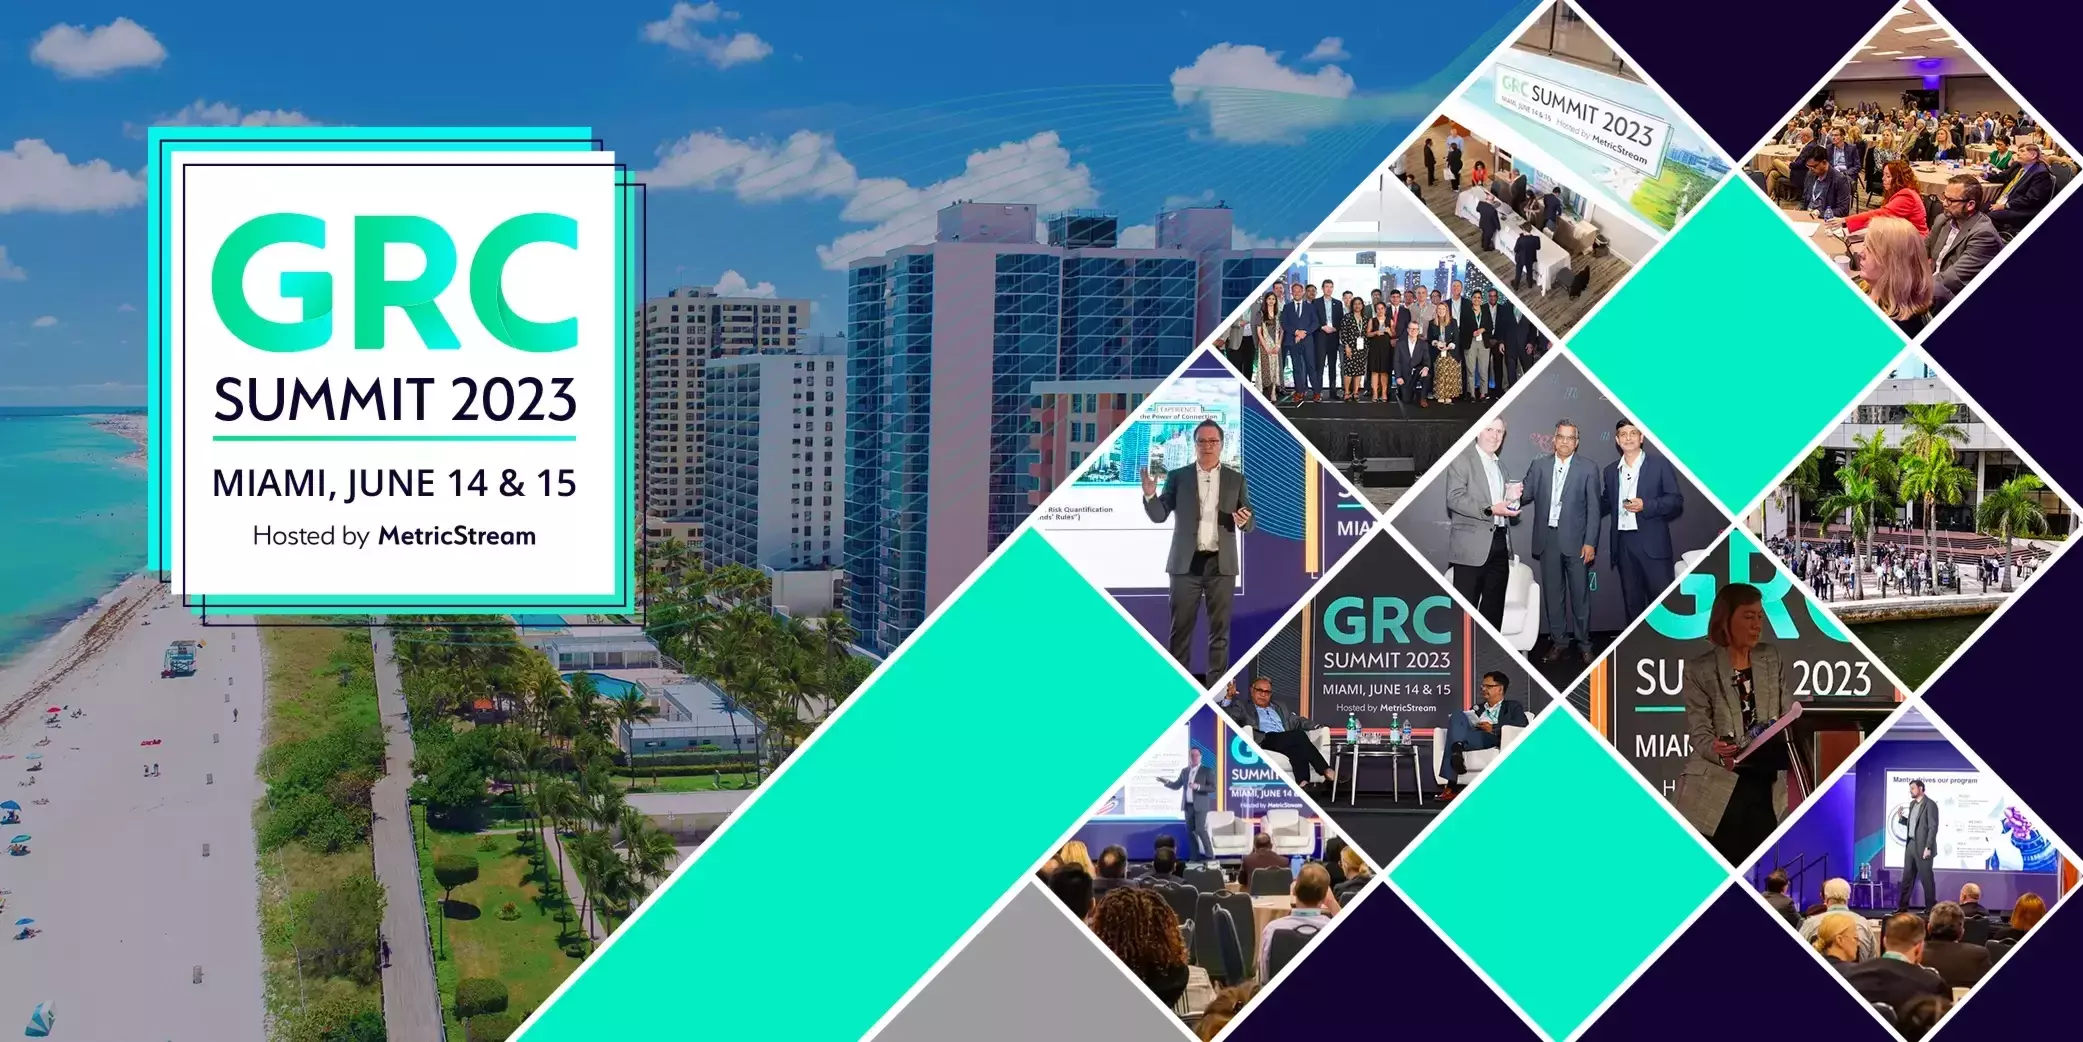 The Power of Connection: Reflections from the 2023 GRC Summit in Miami 